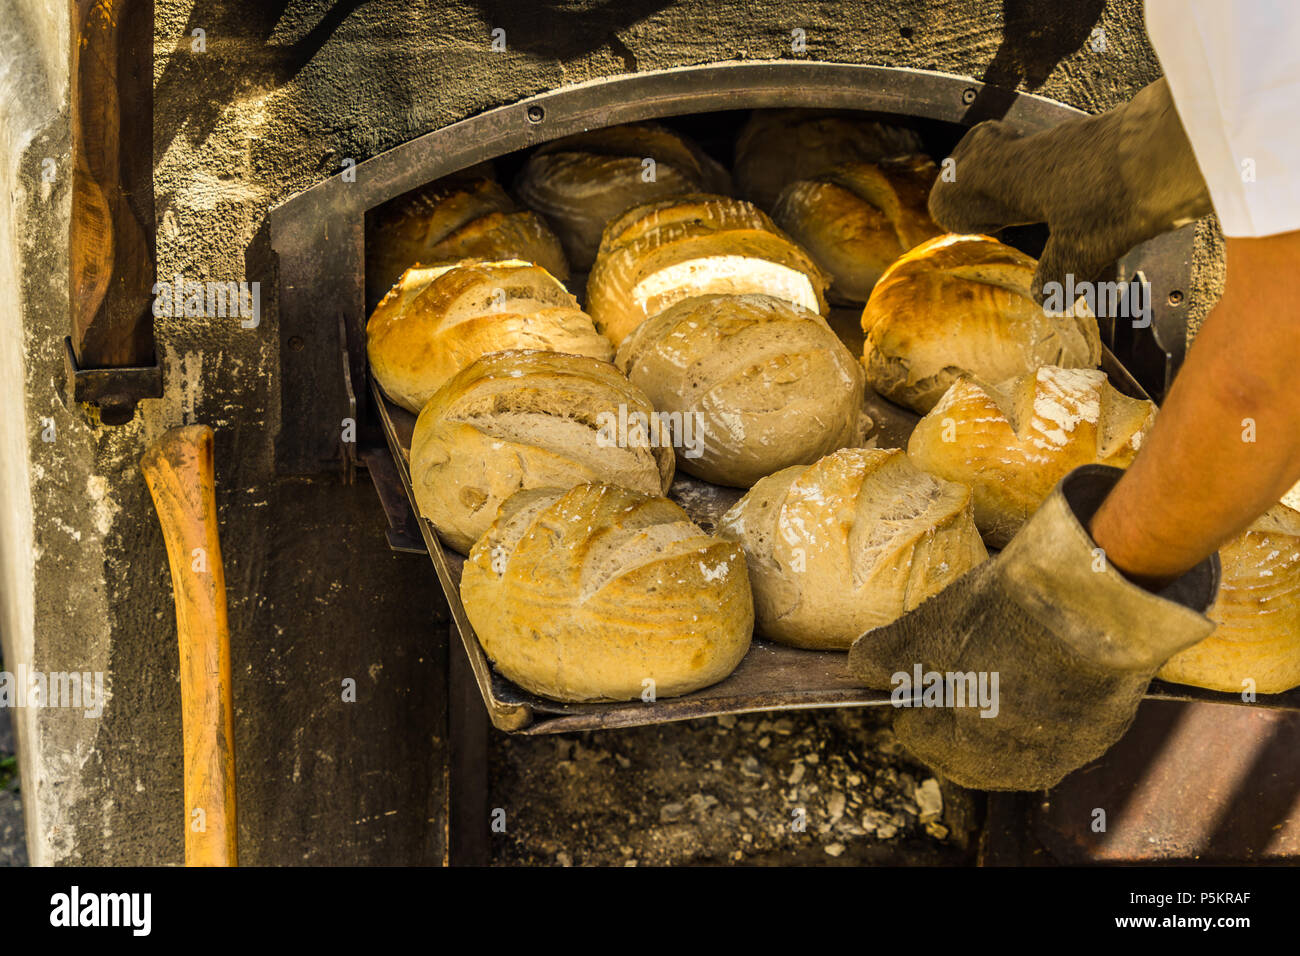 Freshly baked bread on a baking tray at an oven with firewood, Germany  Stock Photo - Alamy